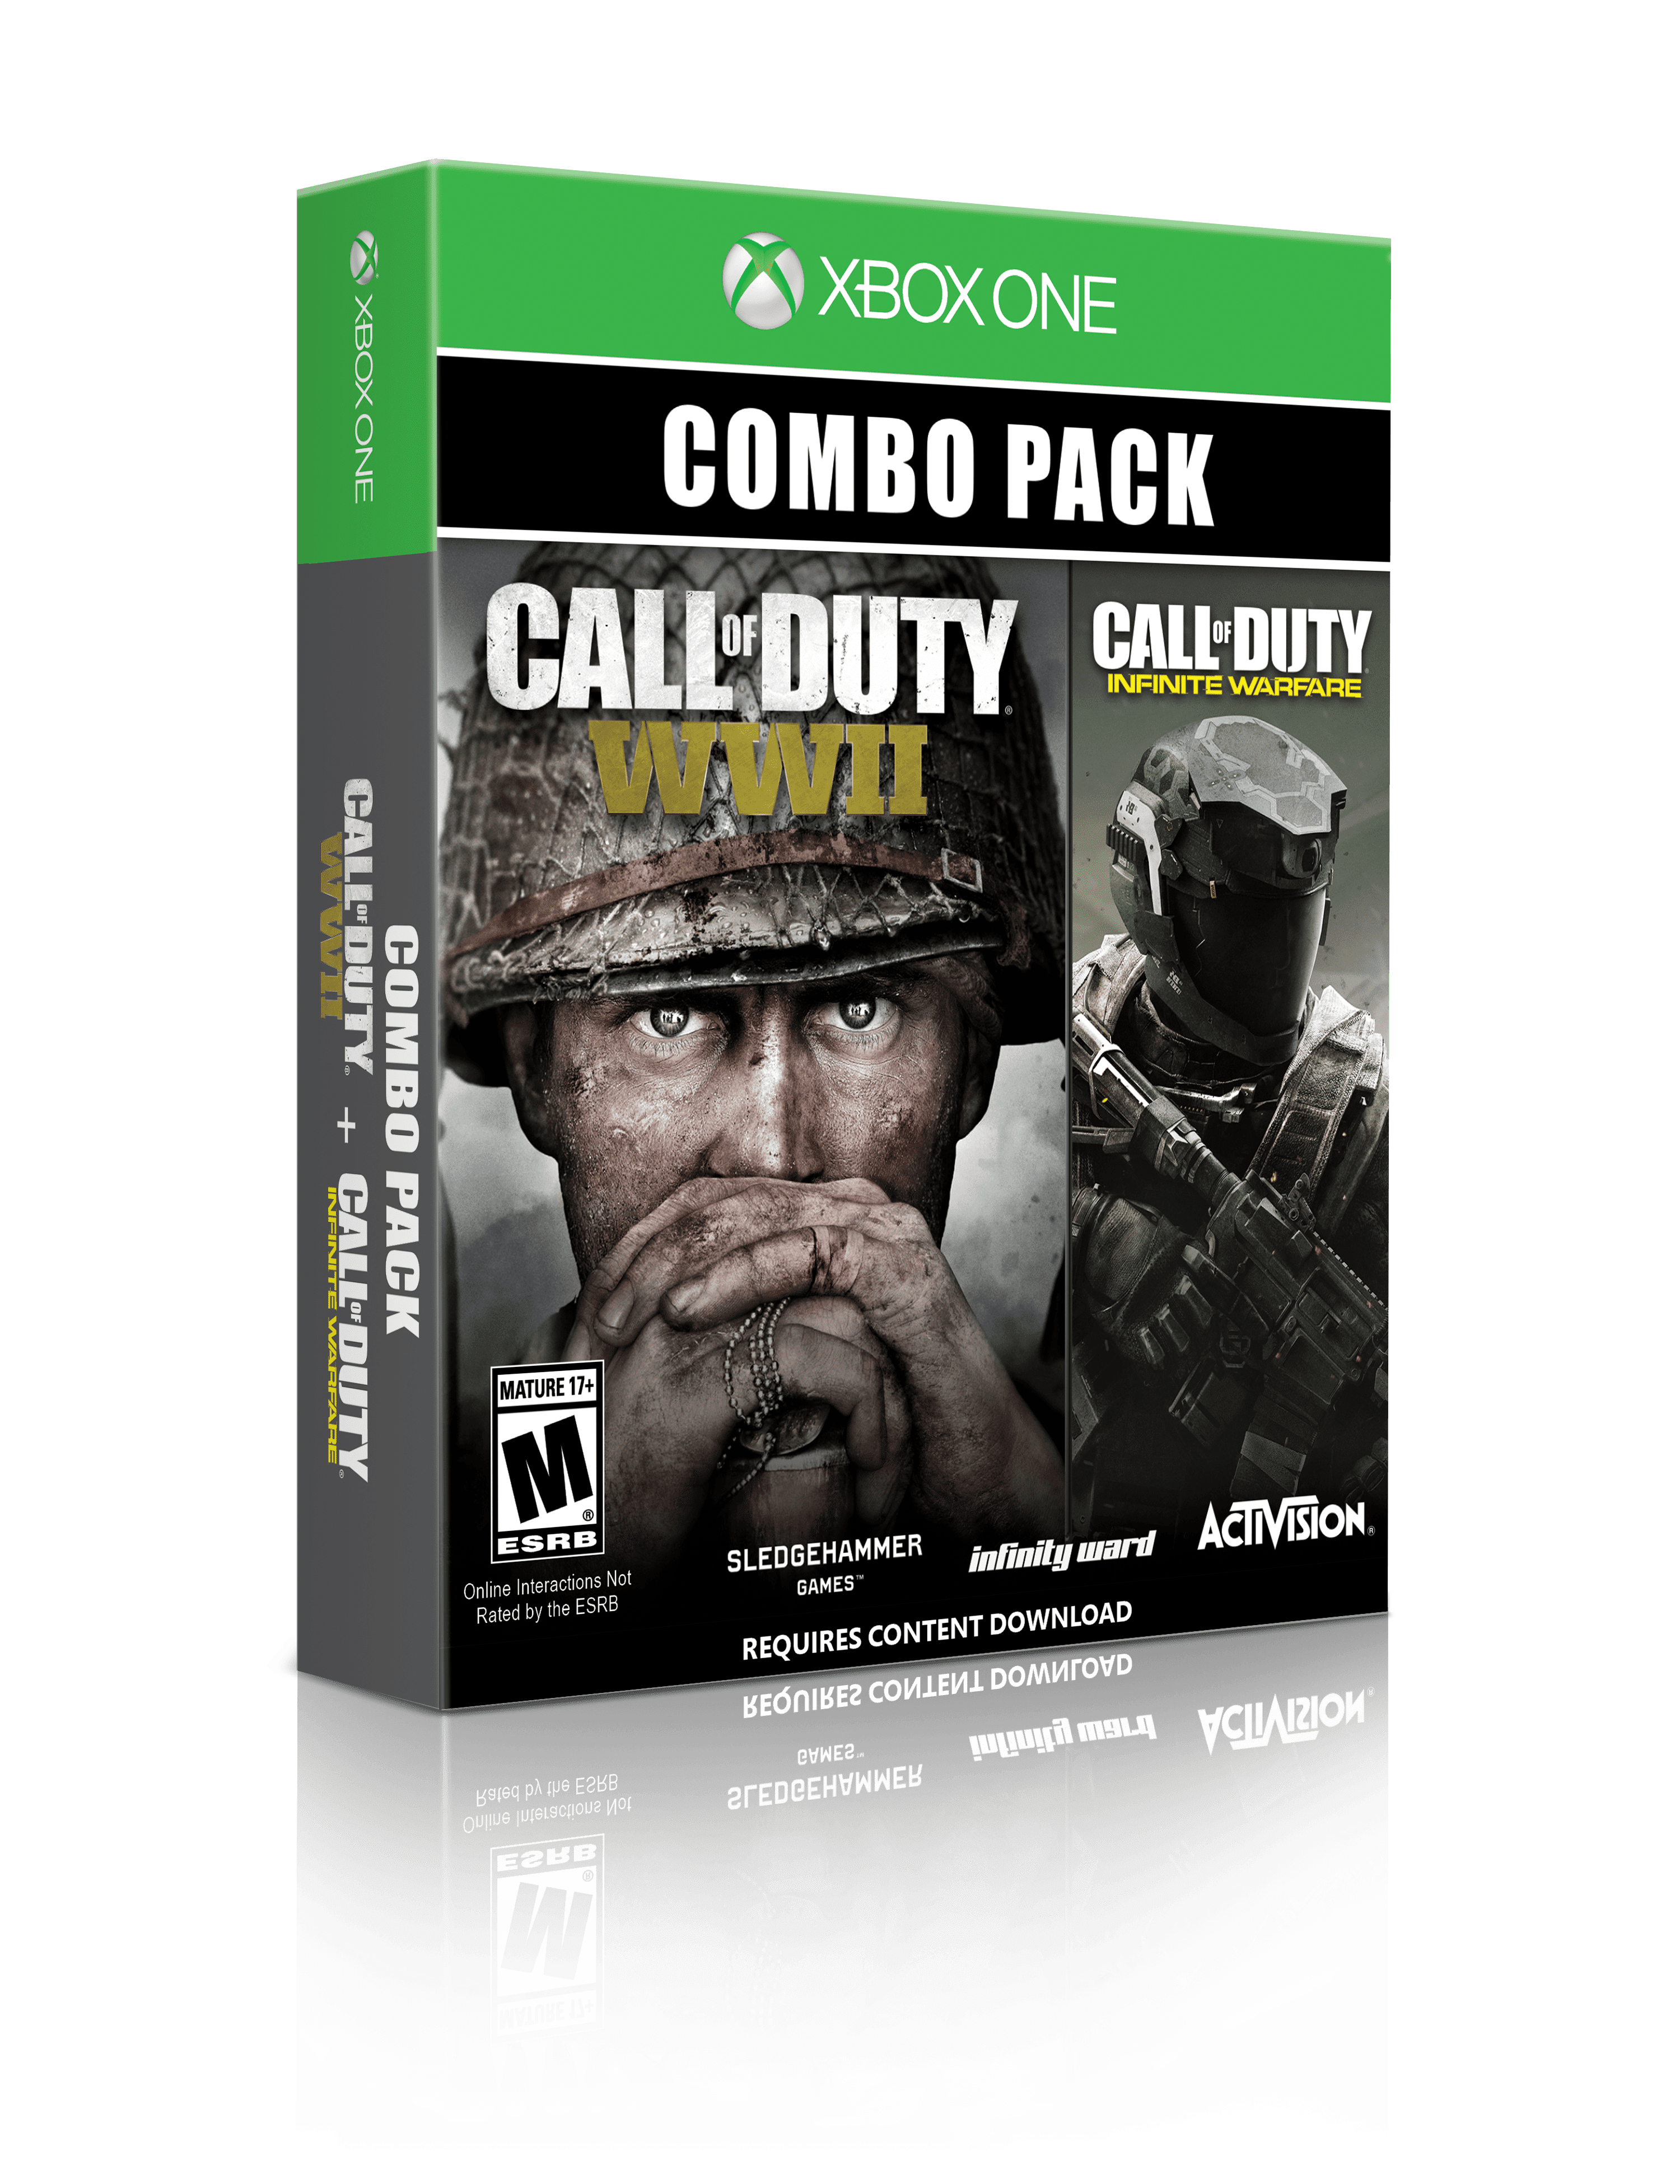 Call of Duty WW2  How a blockbuster video game looks to be a